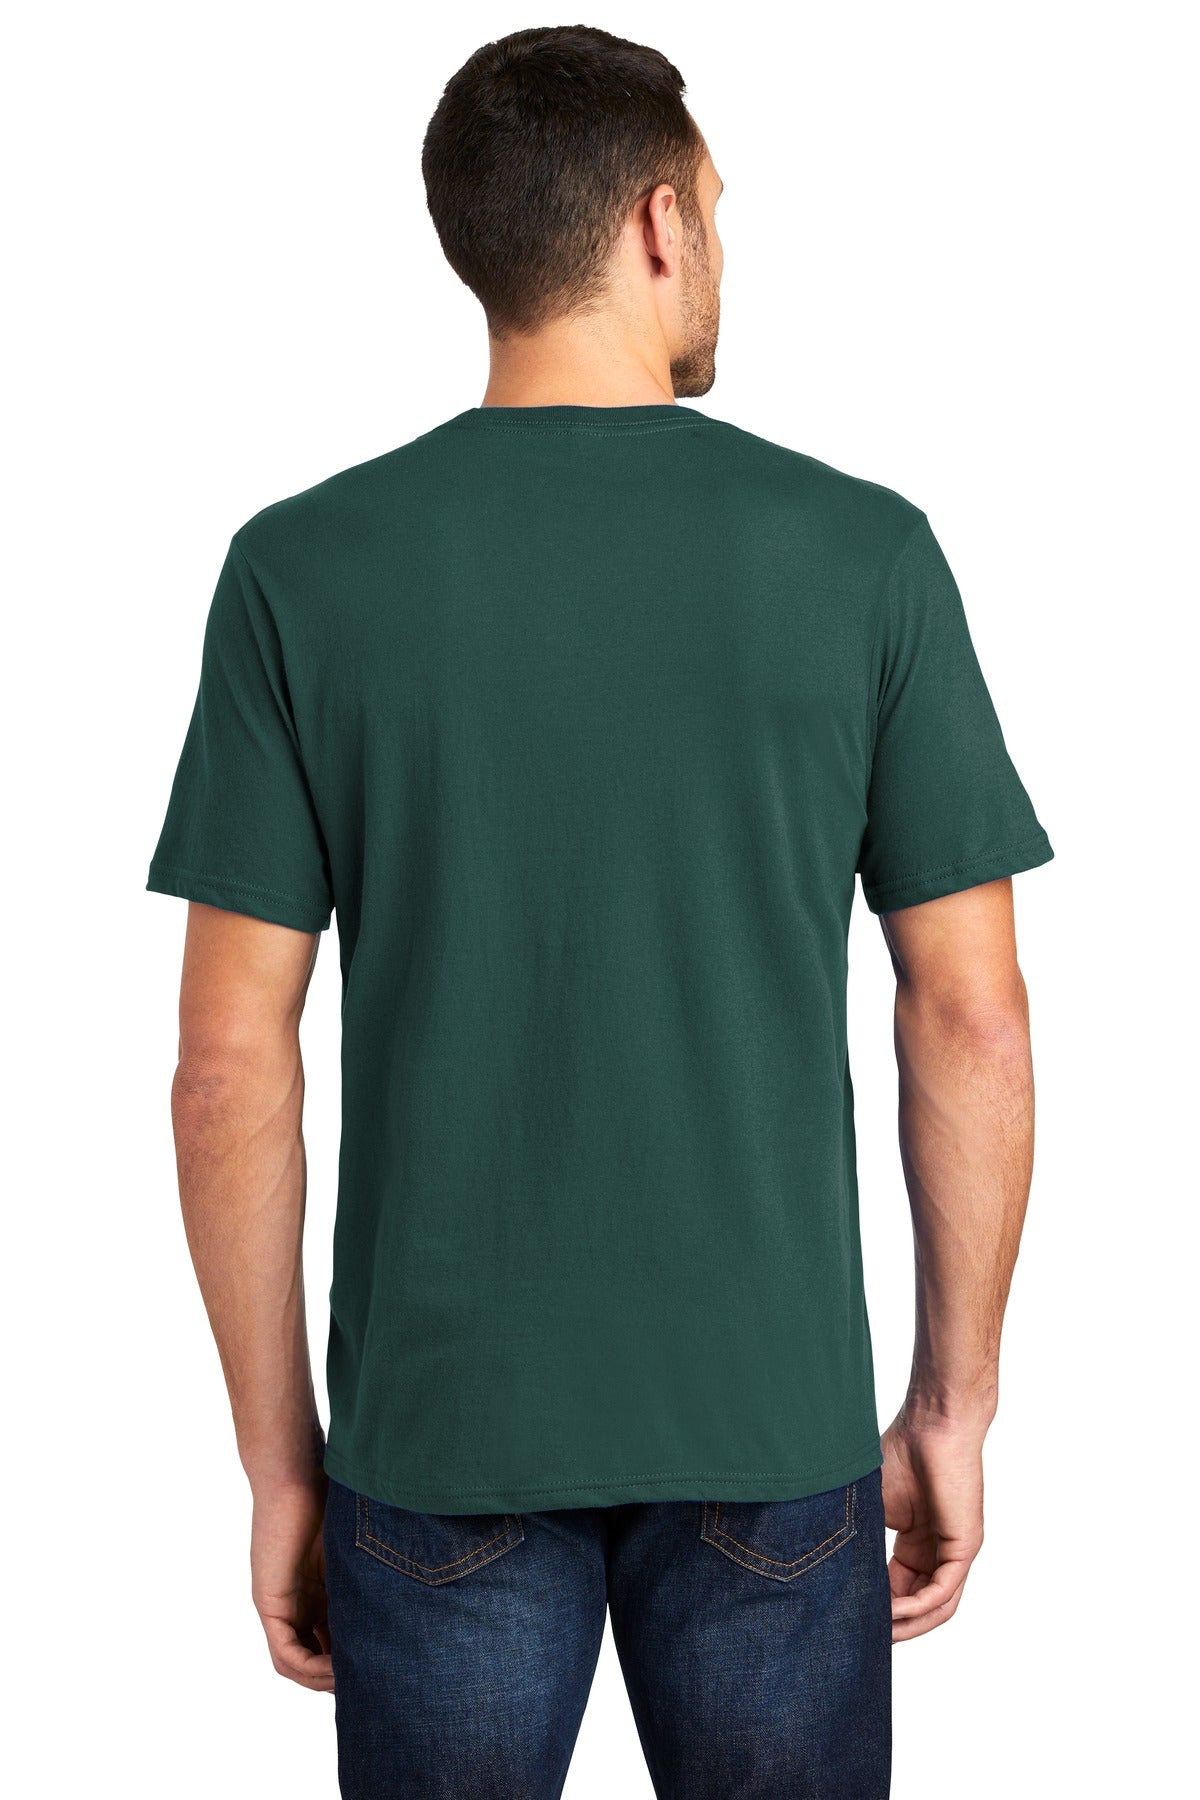 District® Very Important Tee®. DT6000 [Evergreen] - DFW Impression